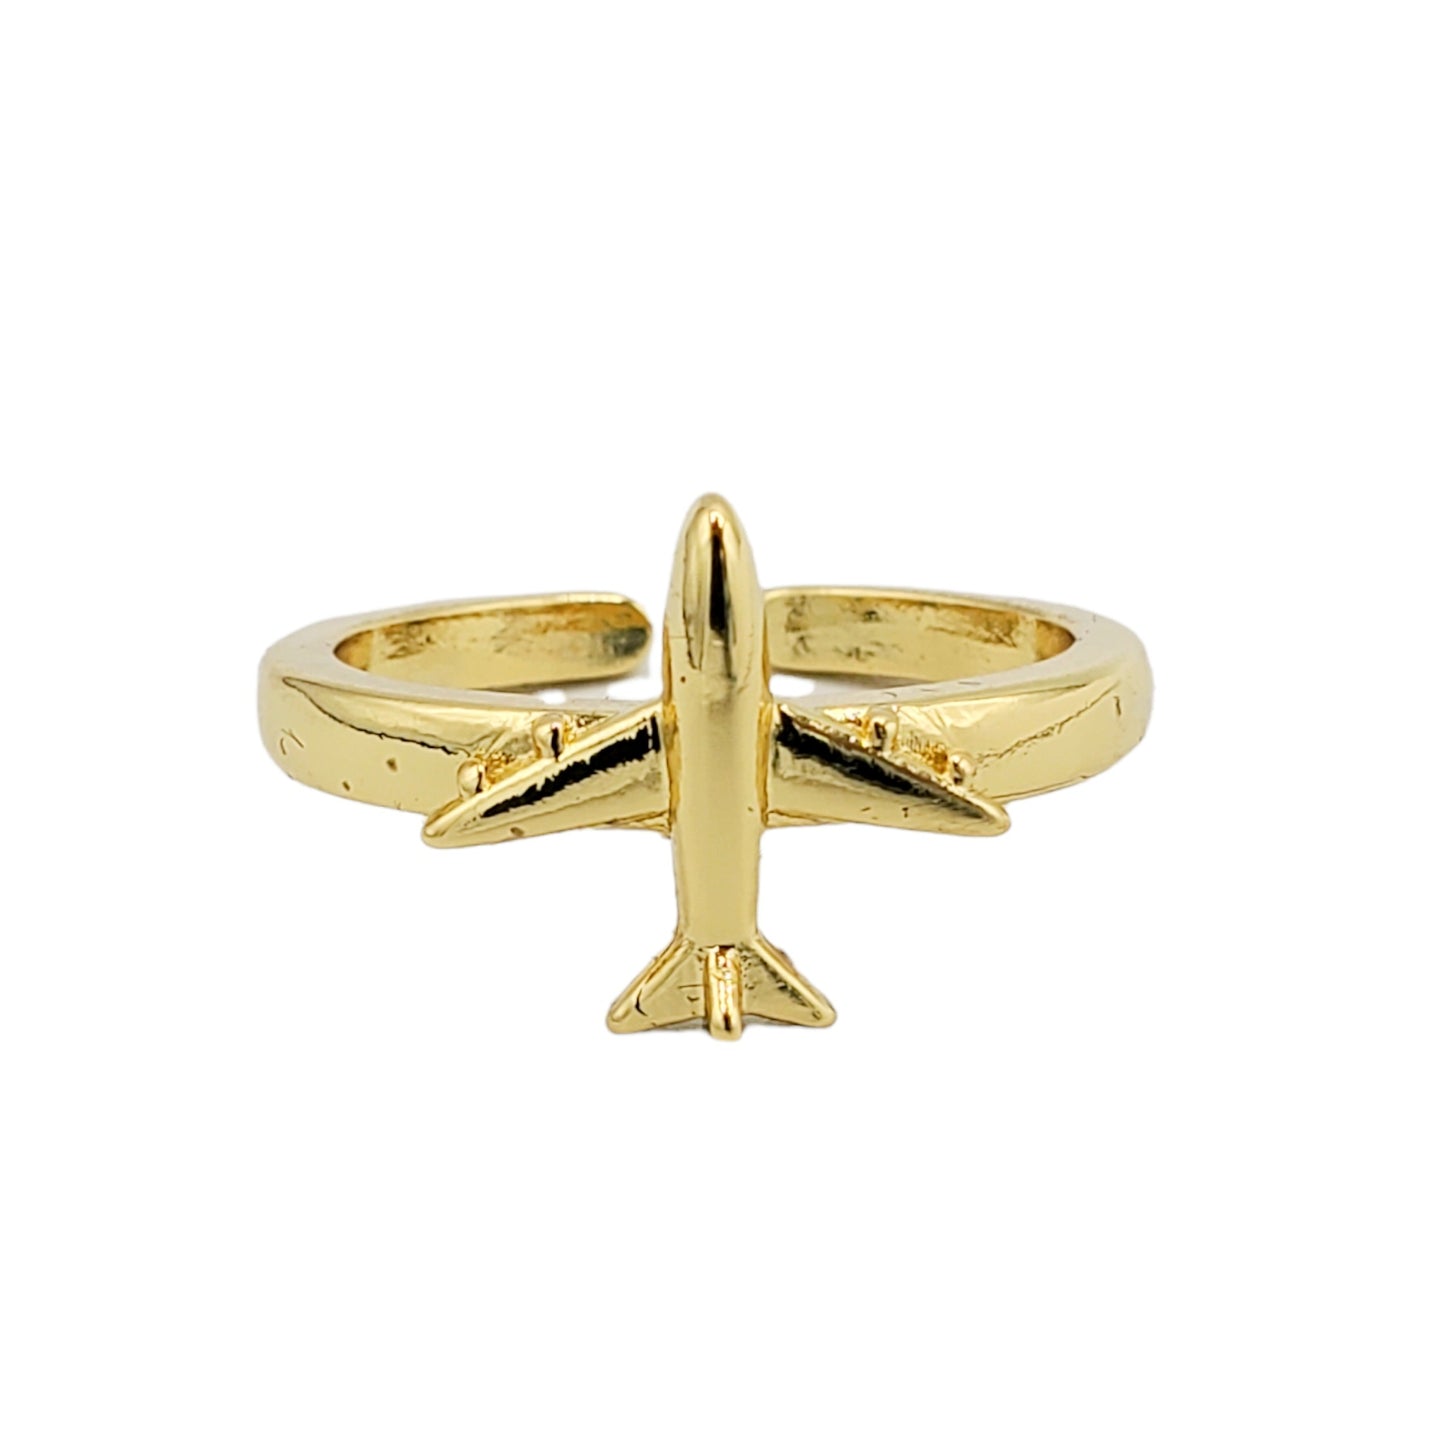 WR-332 Women's Ring/Anillo de Mujer Ajustable Airplane 1cm